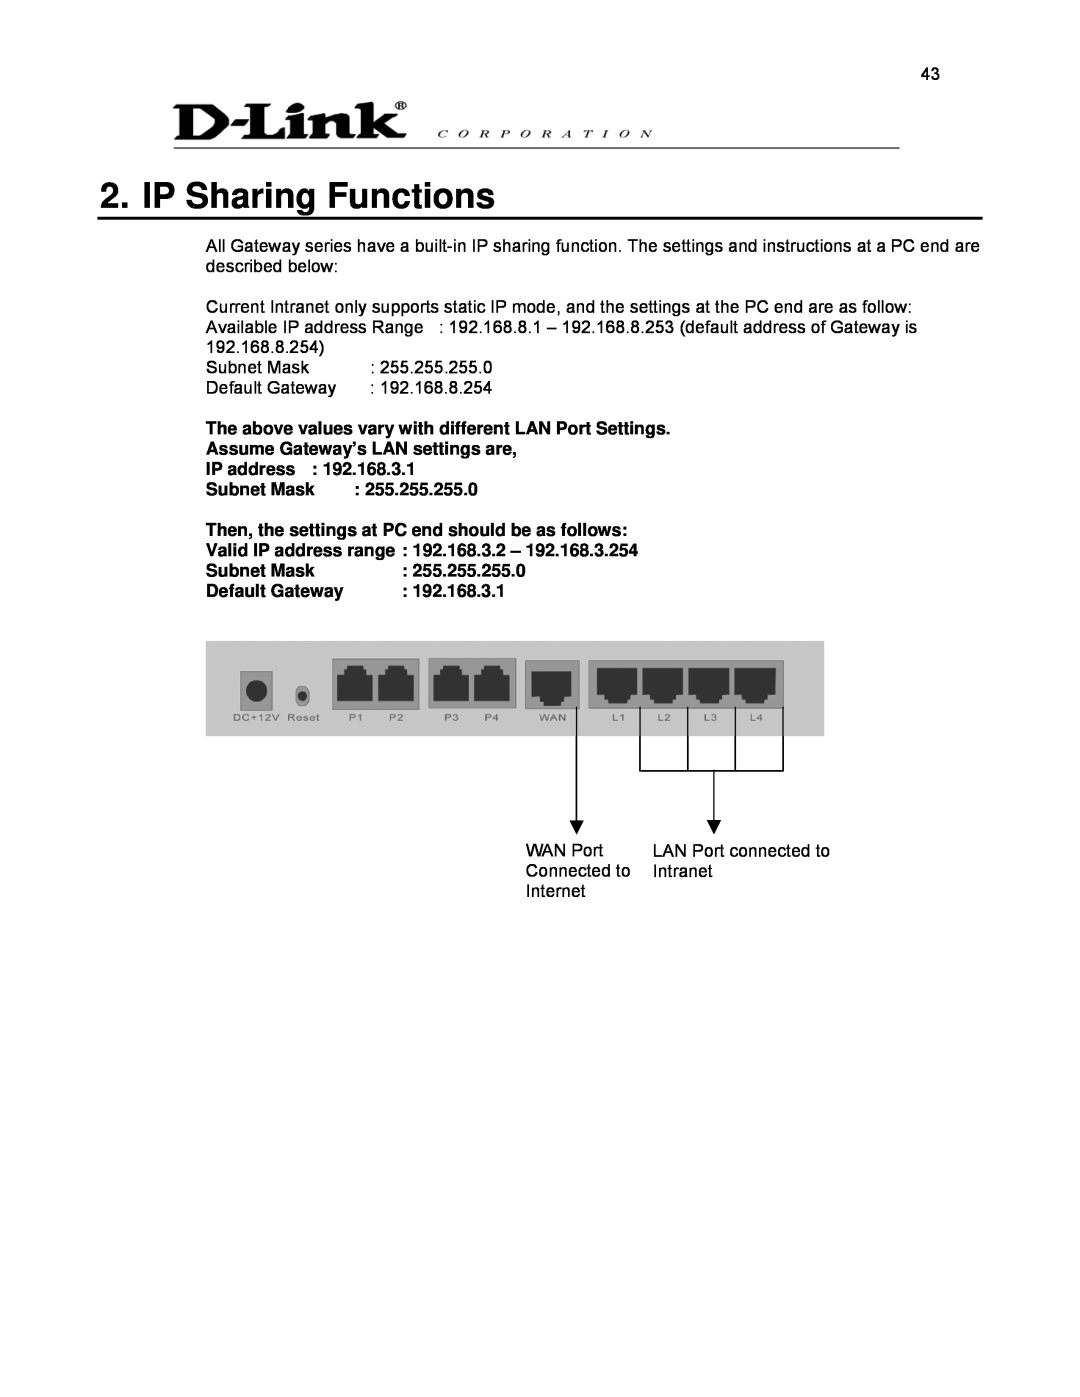 D-Link DVG-2032S IP Sharing Functions, The above values vary with different LAN Port Settings, Subnet Mask, 255.255.255.0 